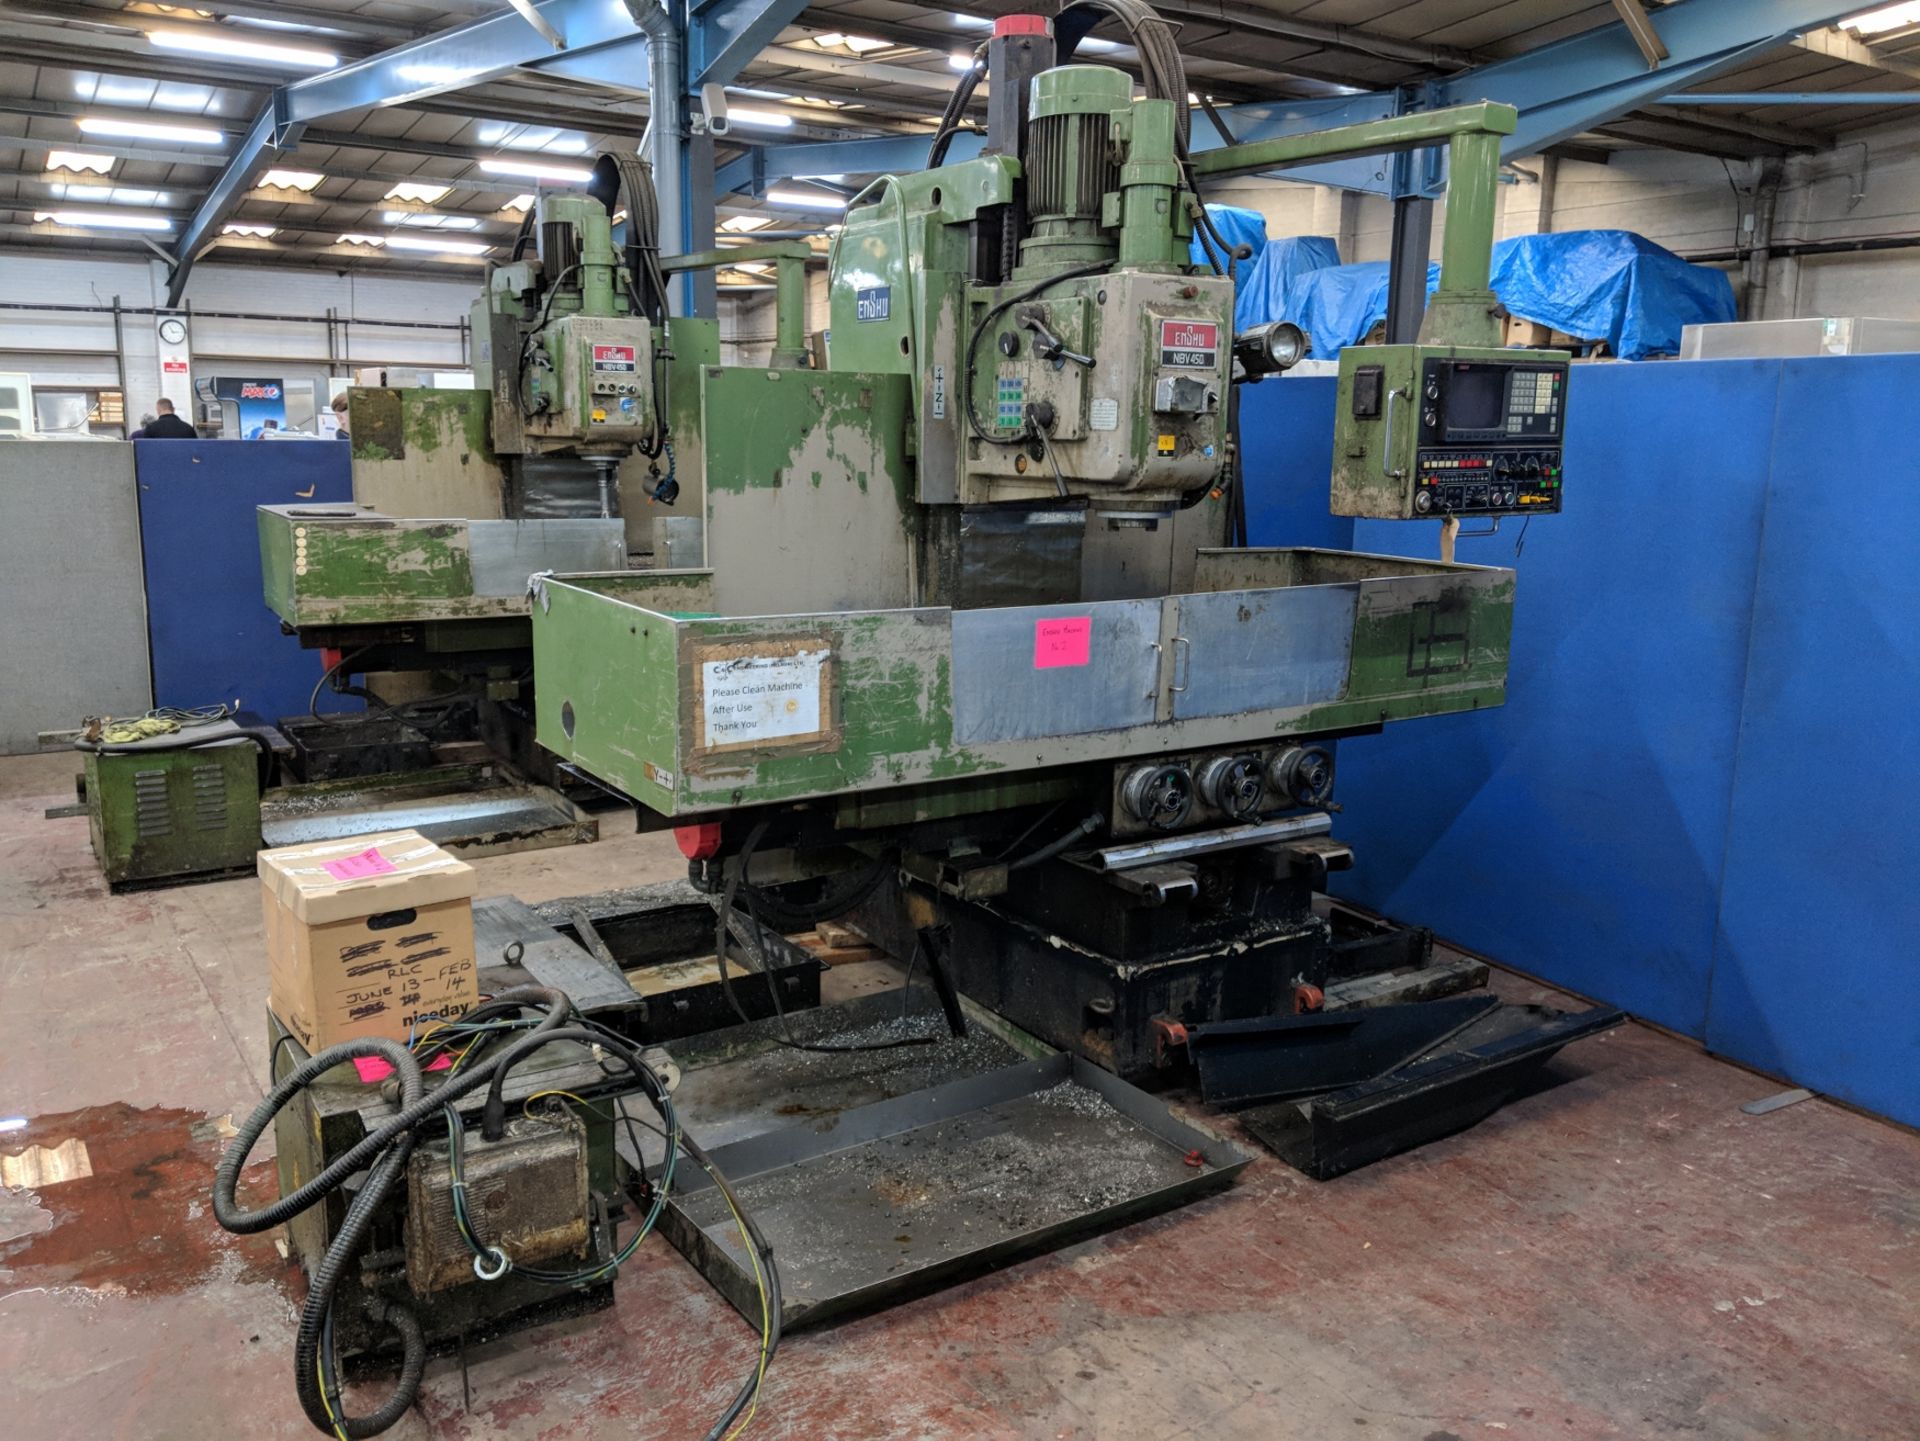 Enshu model NBV450 milling machine complete with Fanuc control unit on swing out arm, including wide